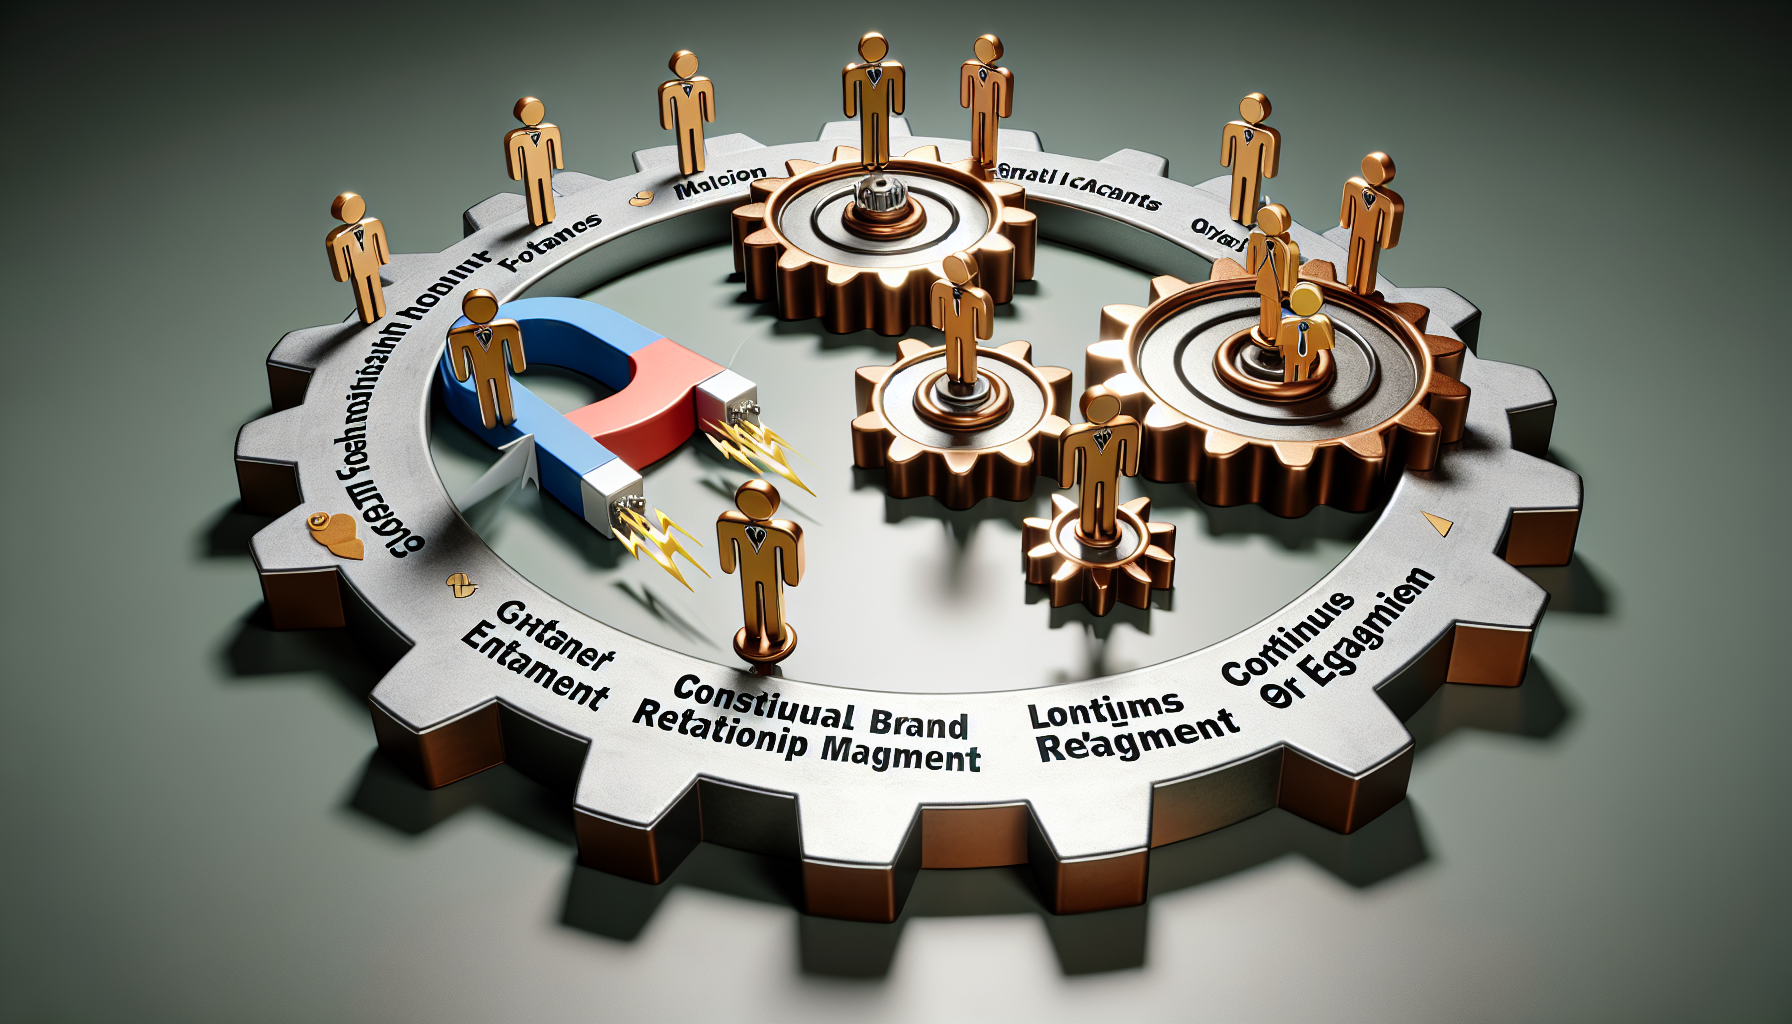 CRM process diagram with gears transforming leads to loyal, golden brand advocates through personalization and engagement.